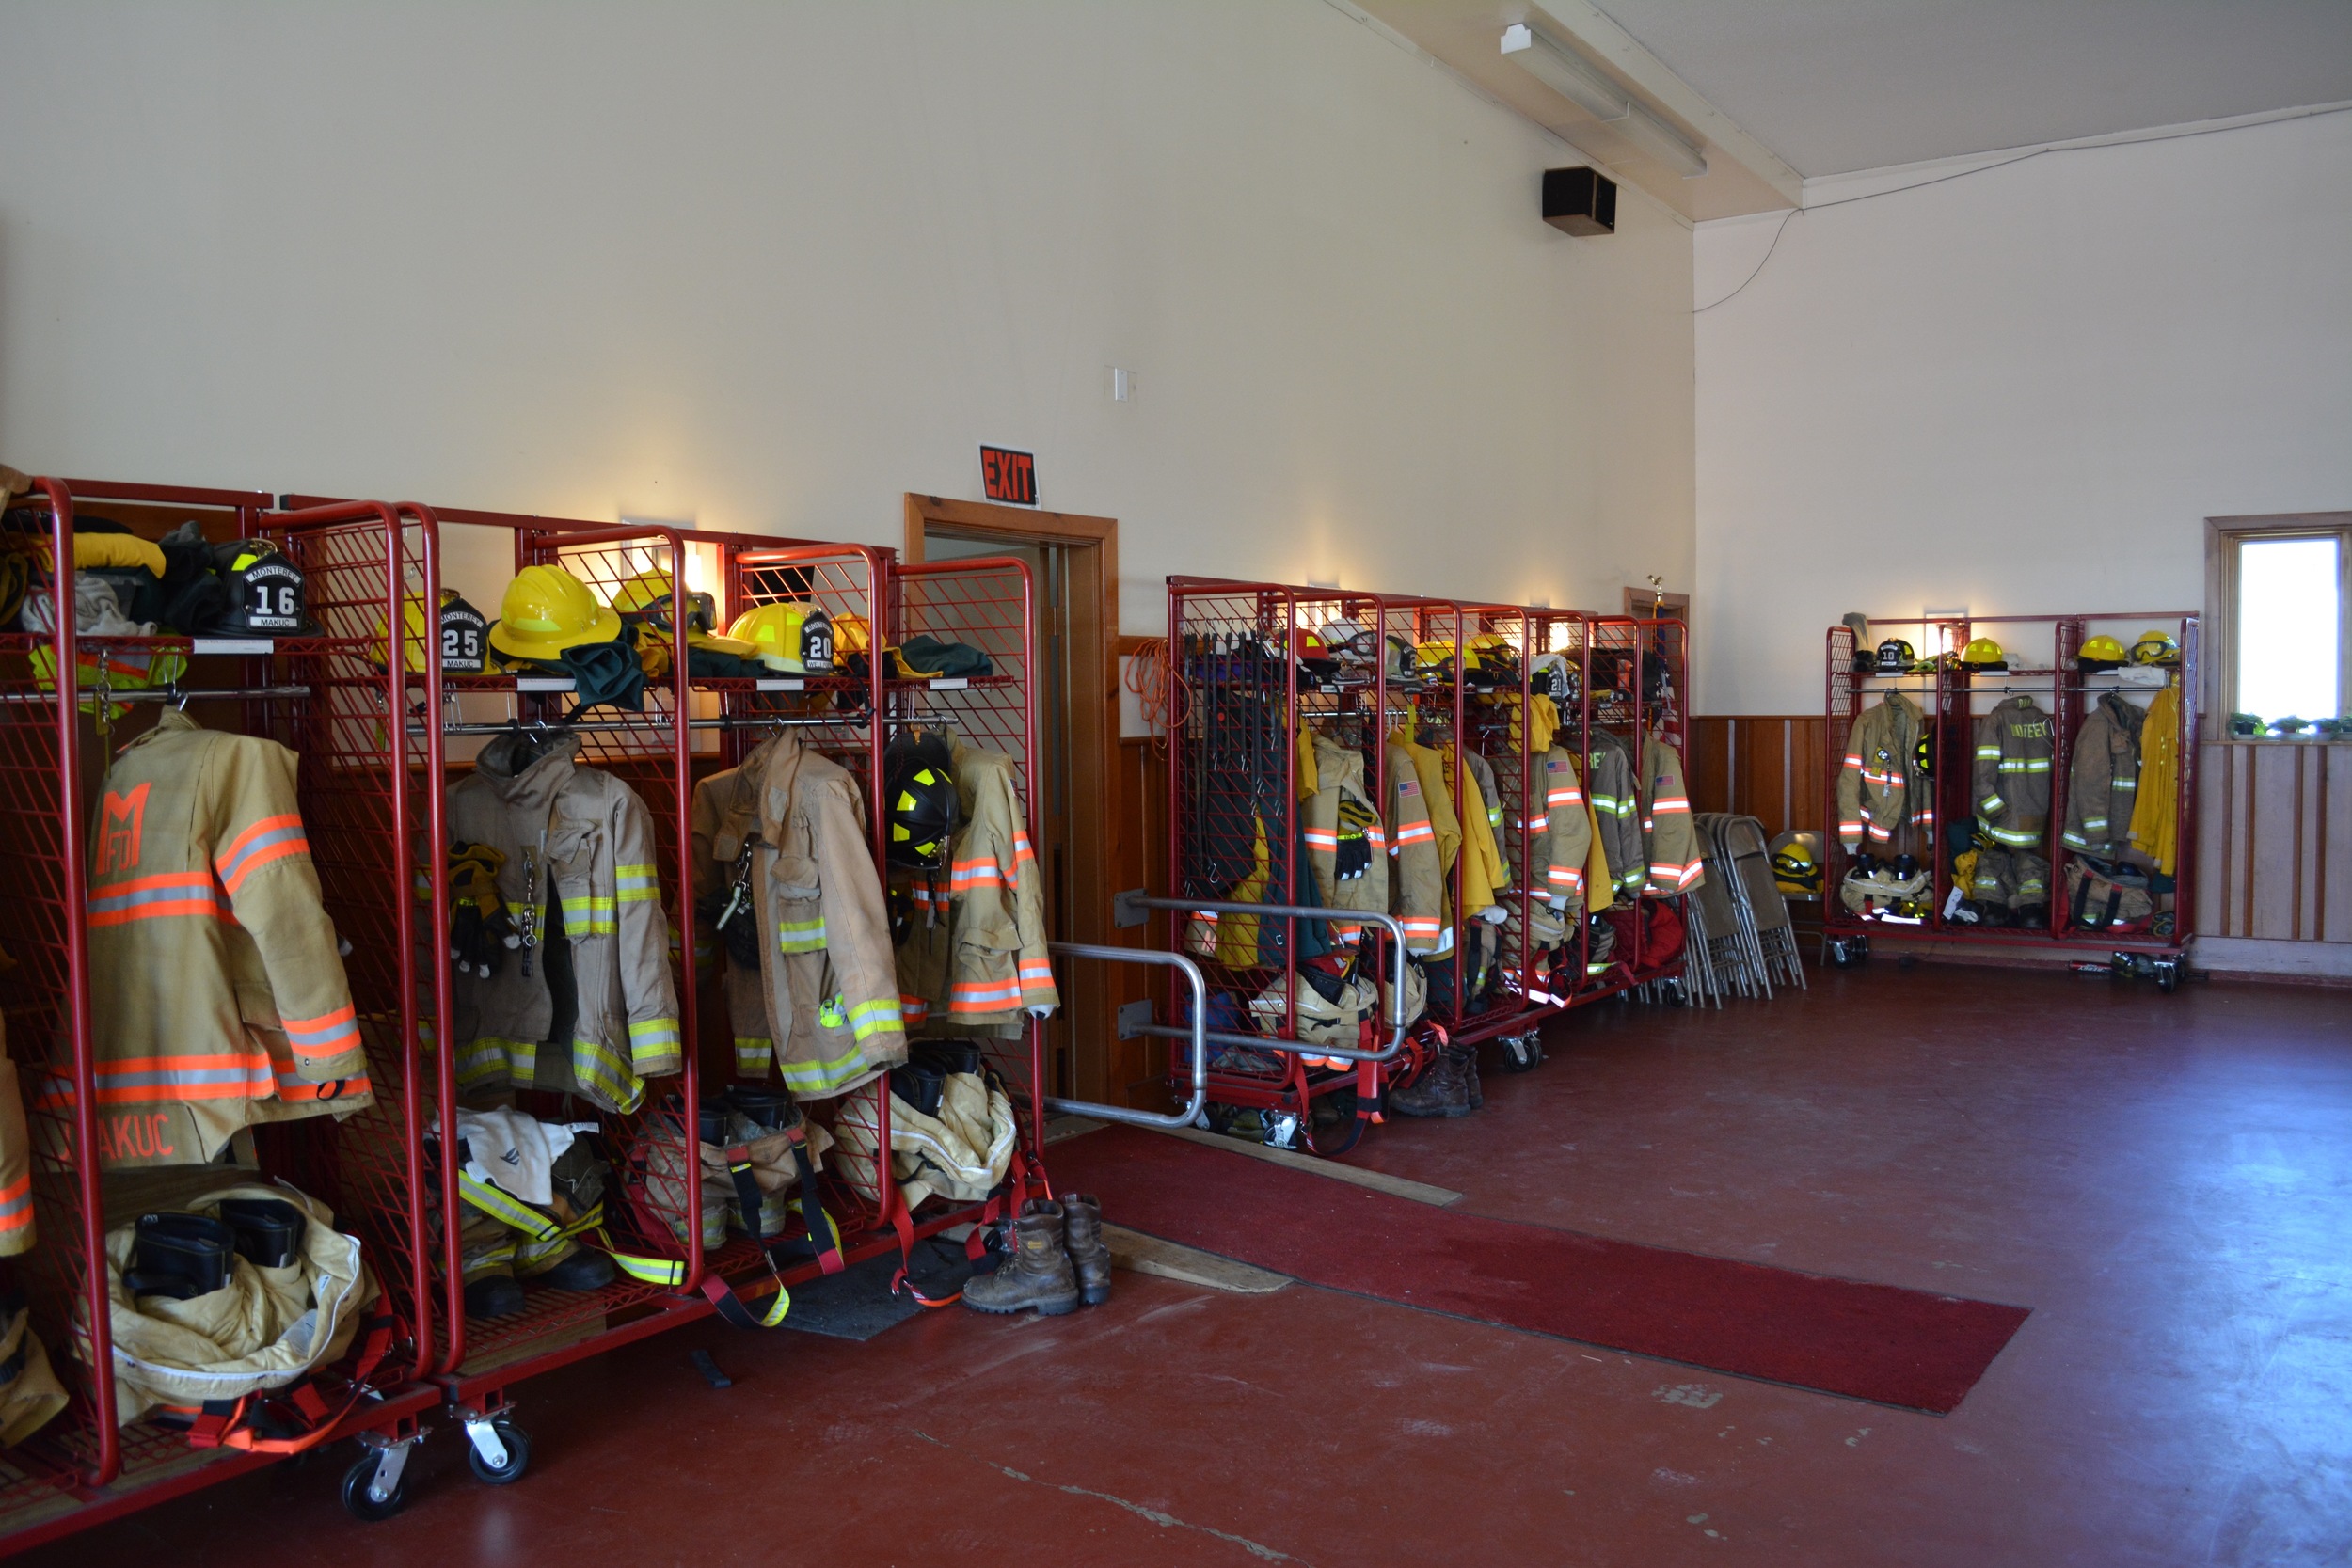 Inside the Fire Station 